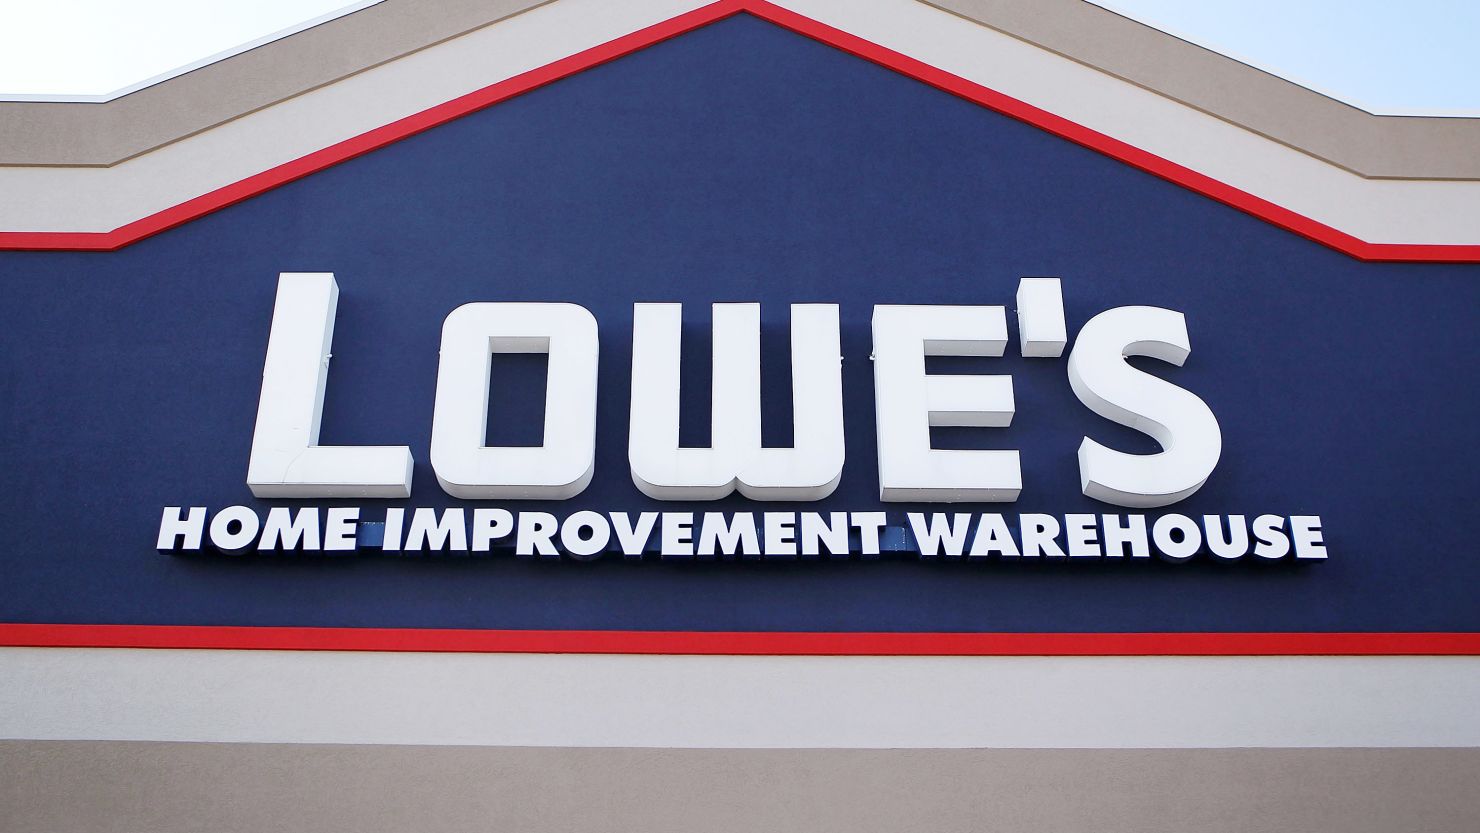 Previously, Lowe's acknowledged and defended its decision on Twitter.